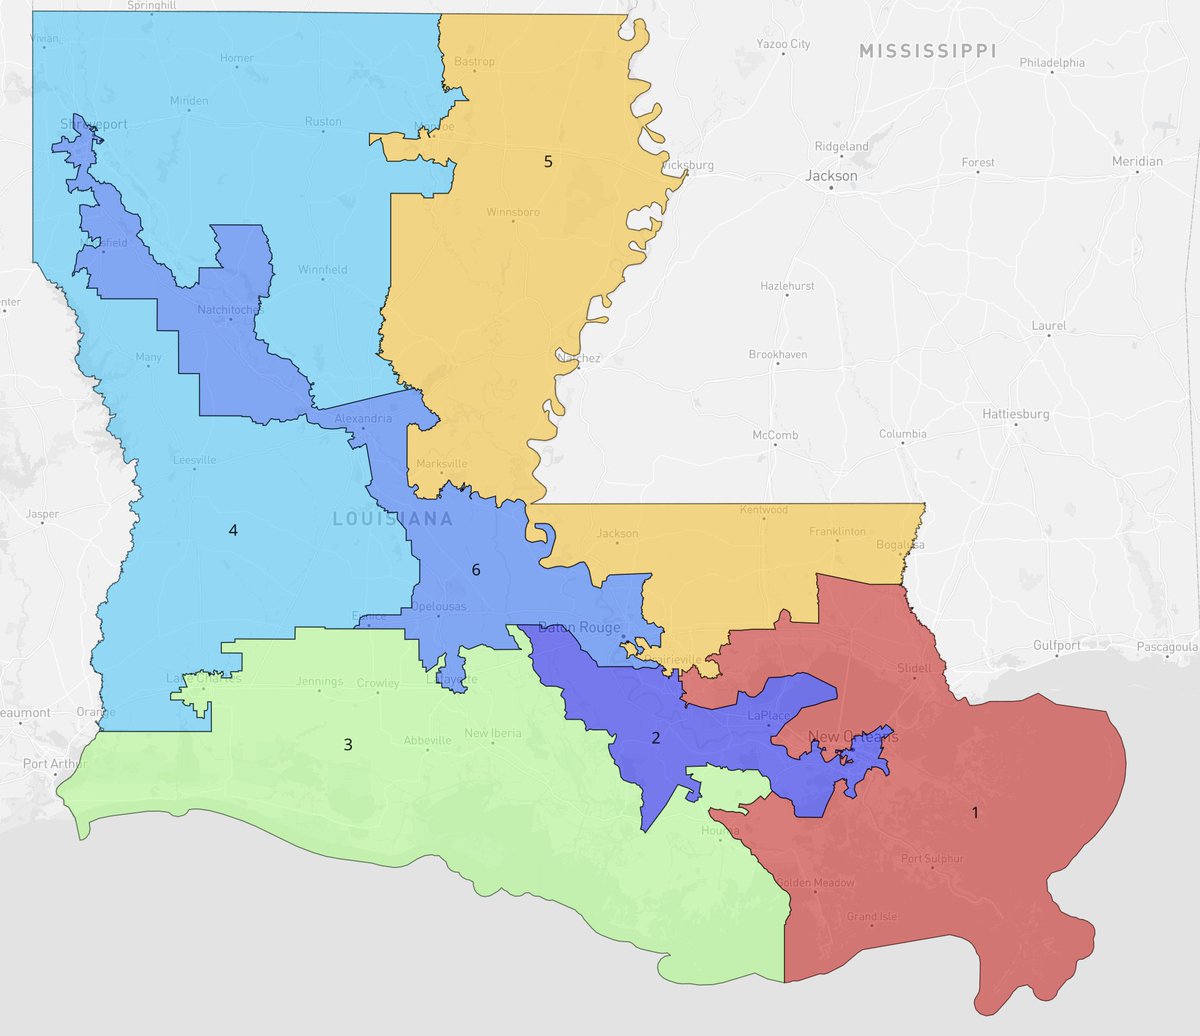 NEW: in a victory for Dems/civil rights groups, the Supreme Court has granted a stay of a lower court ruling invalidating Louisiana's map, restoring a new Black majority district (#LA06) for the 2024 election.